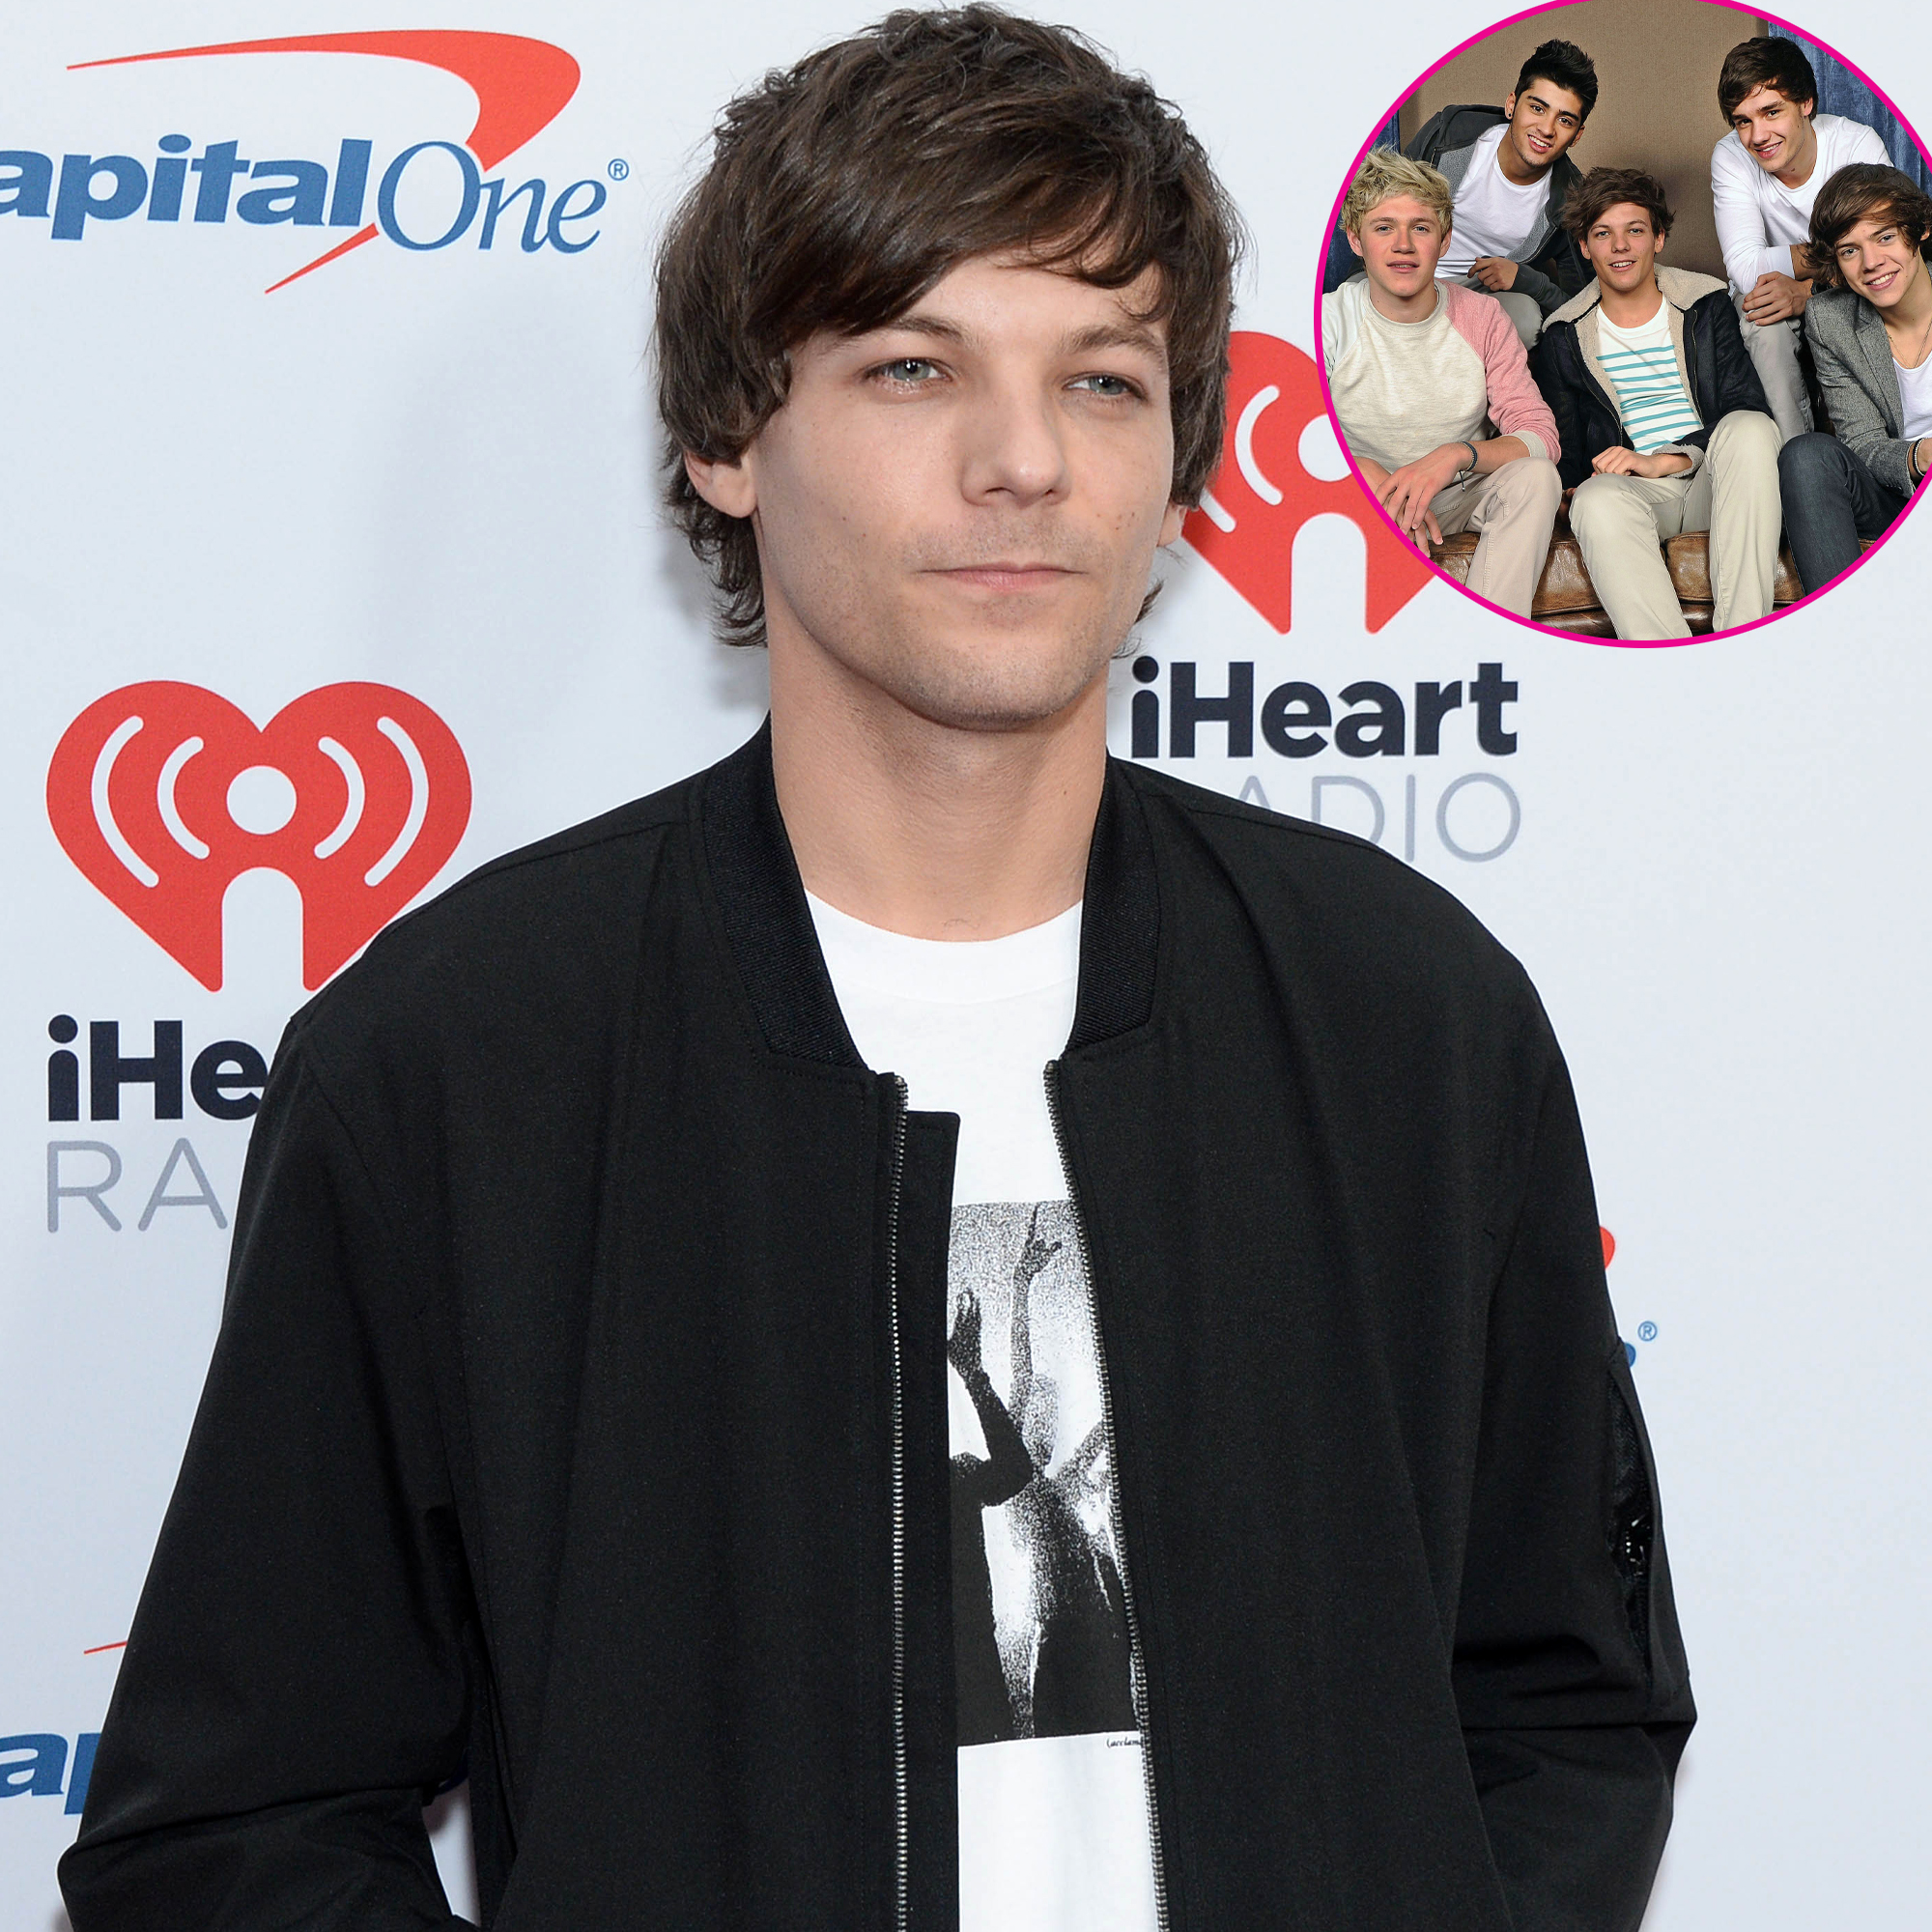 See One Direction's Louis Tomlinson Debut 'Just Hold On